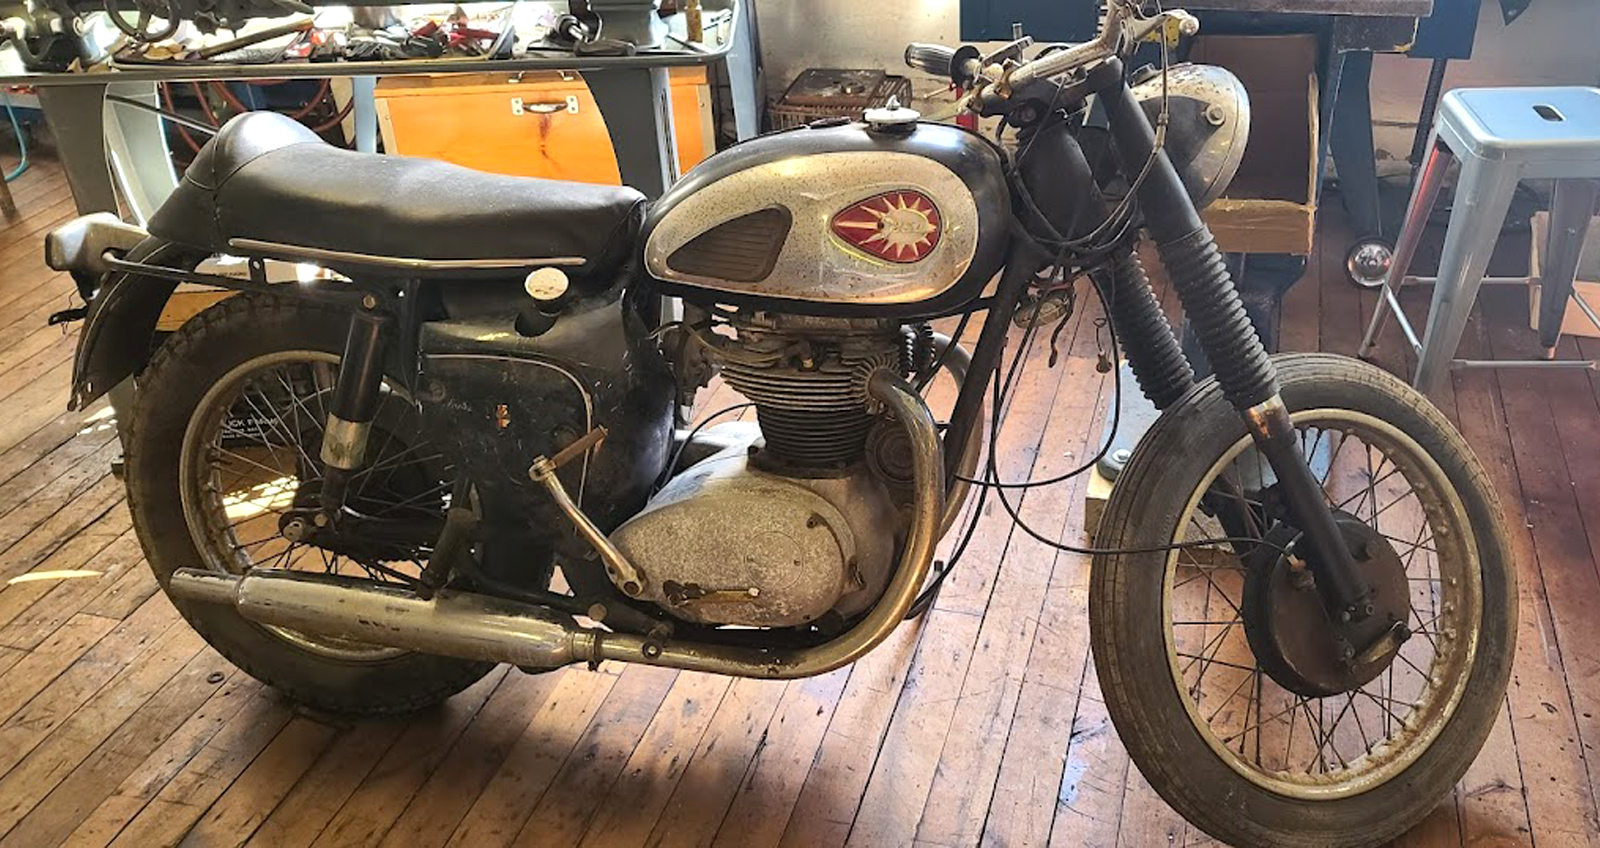 Doug's Cycle Barn specializes in vintage motorcycle restoration services